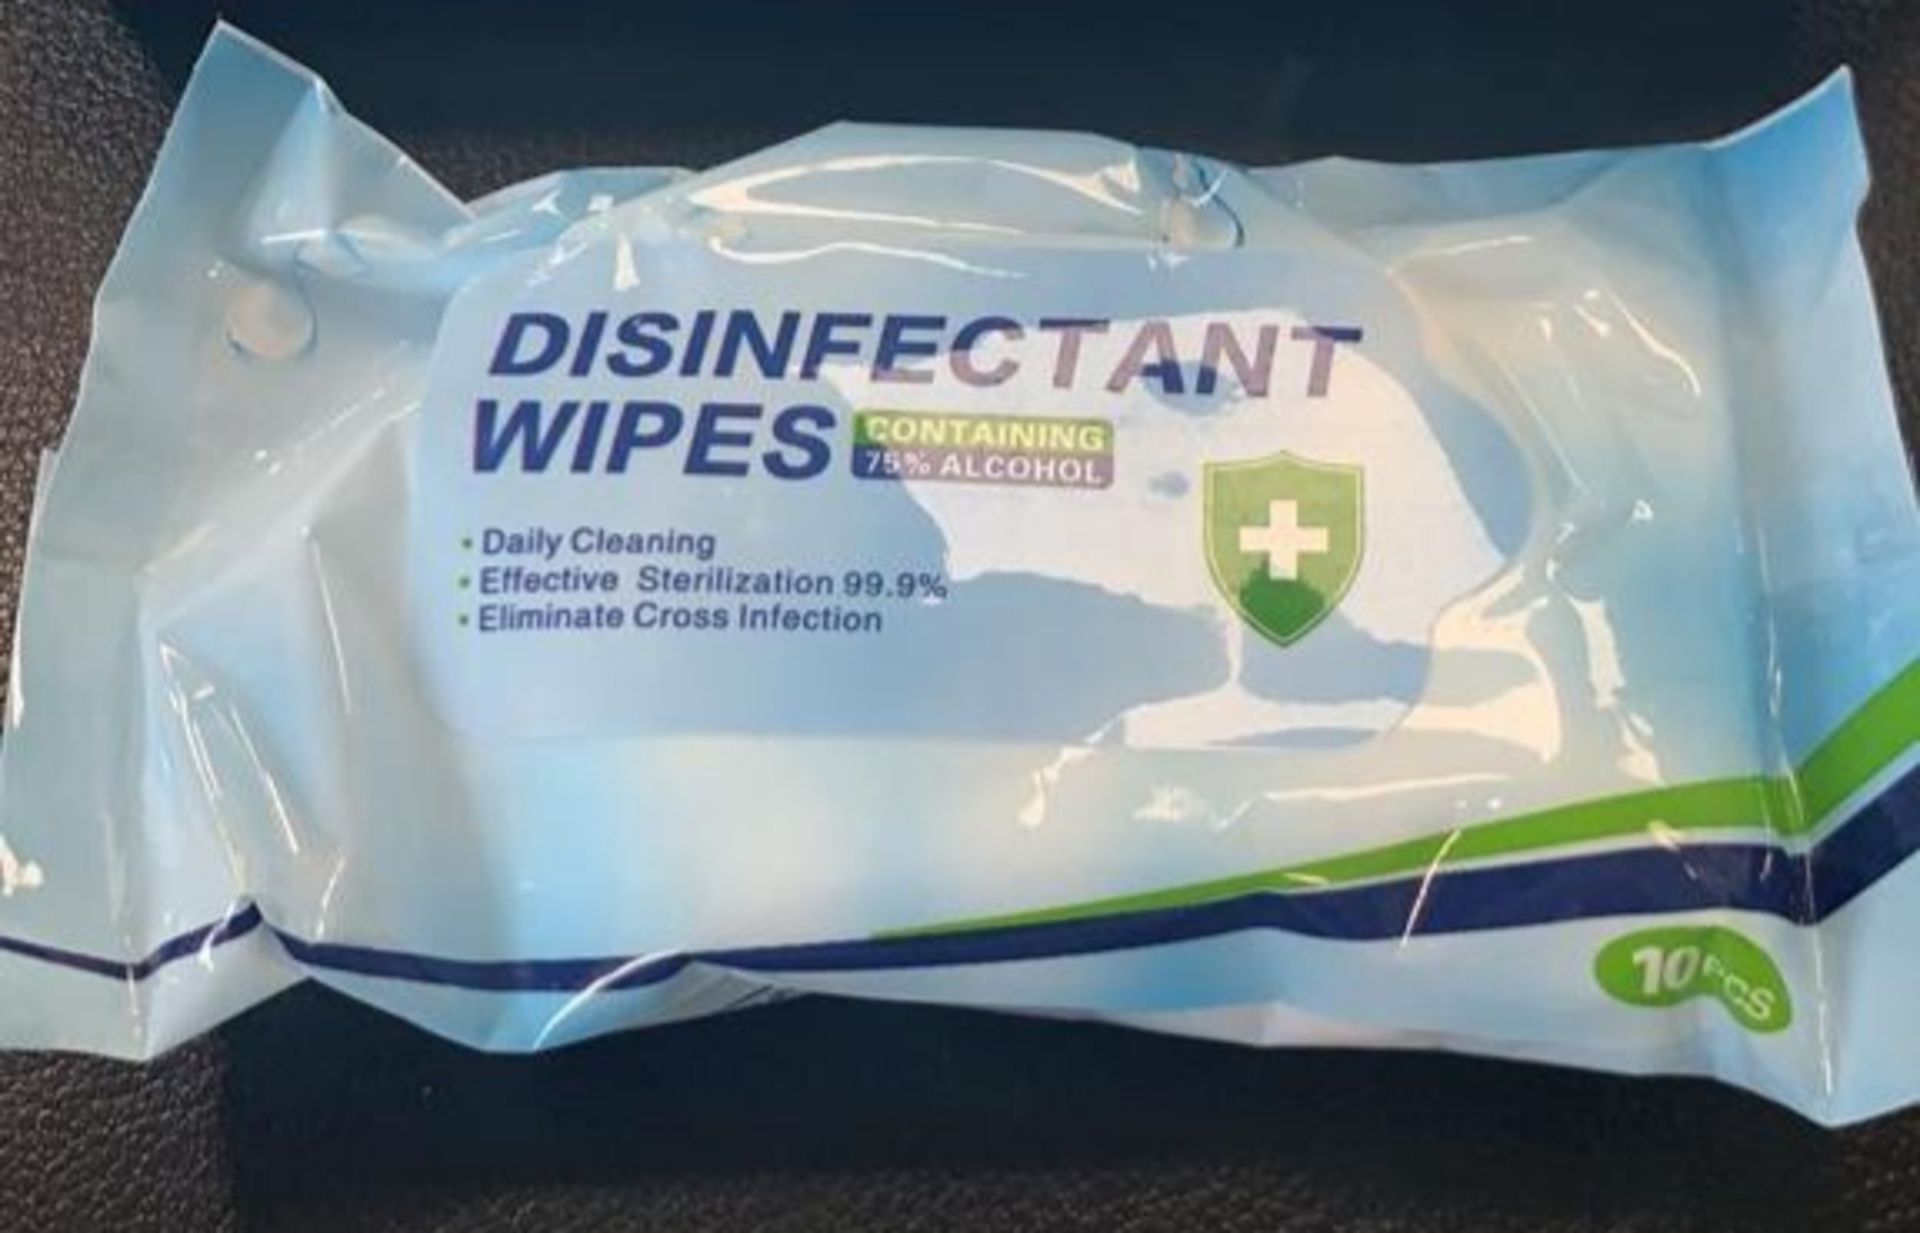 10pk alcohol wipes 2400 wipes per box 75% alcohol - Image 3 of 7